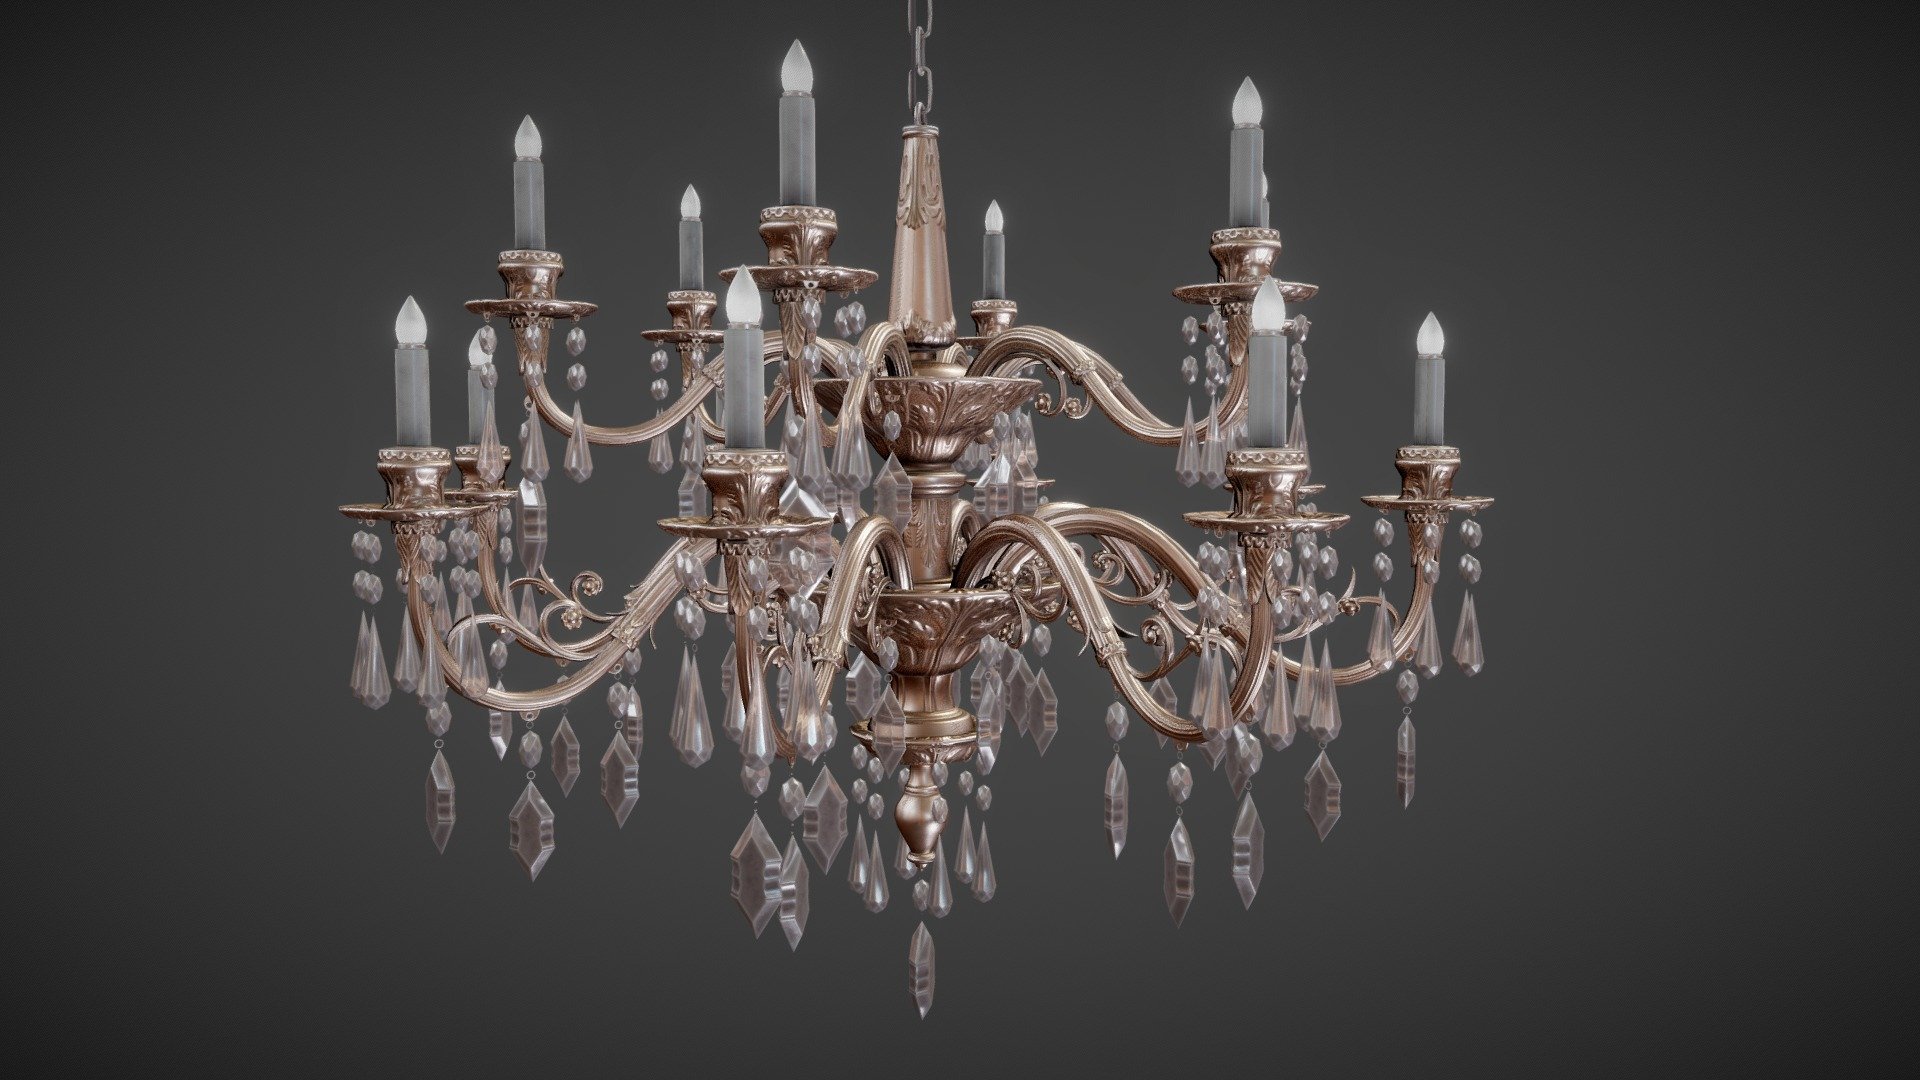 Antique chandelier. Please note the polycount can be fairly high depending on your needs.

Chandelier only: 52k tris; 2k maps.

Chandelier and glass: 69k tris; 2k + 512px maps.

For setup: make sure that the glass uses an alpha blend material; for best results, the small connecting rings should use a material with alpha clipping instead. Feel free to let me know if you need any help getting the model to work 3d model